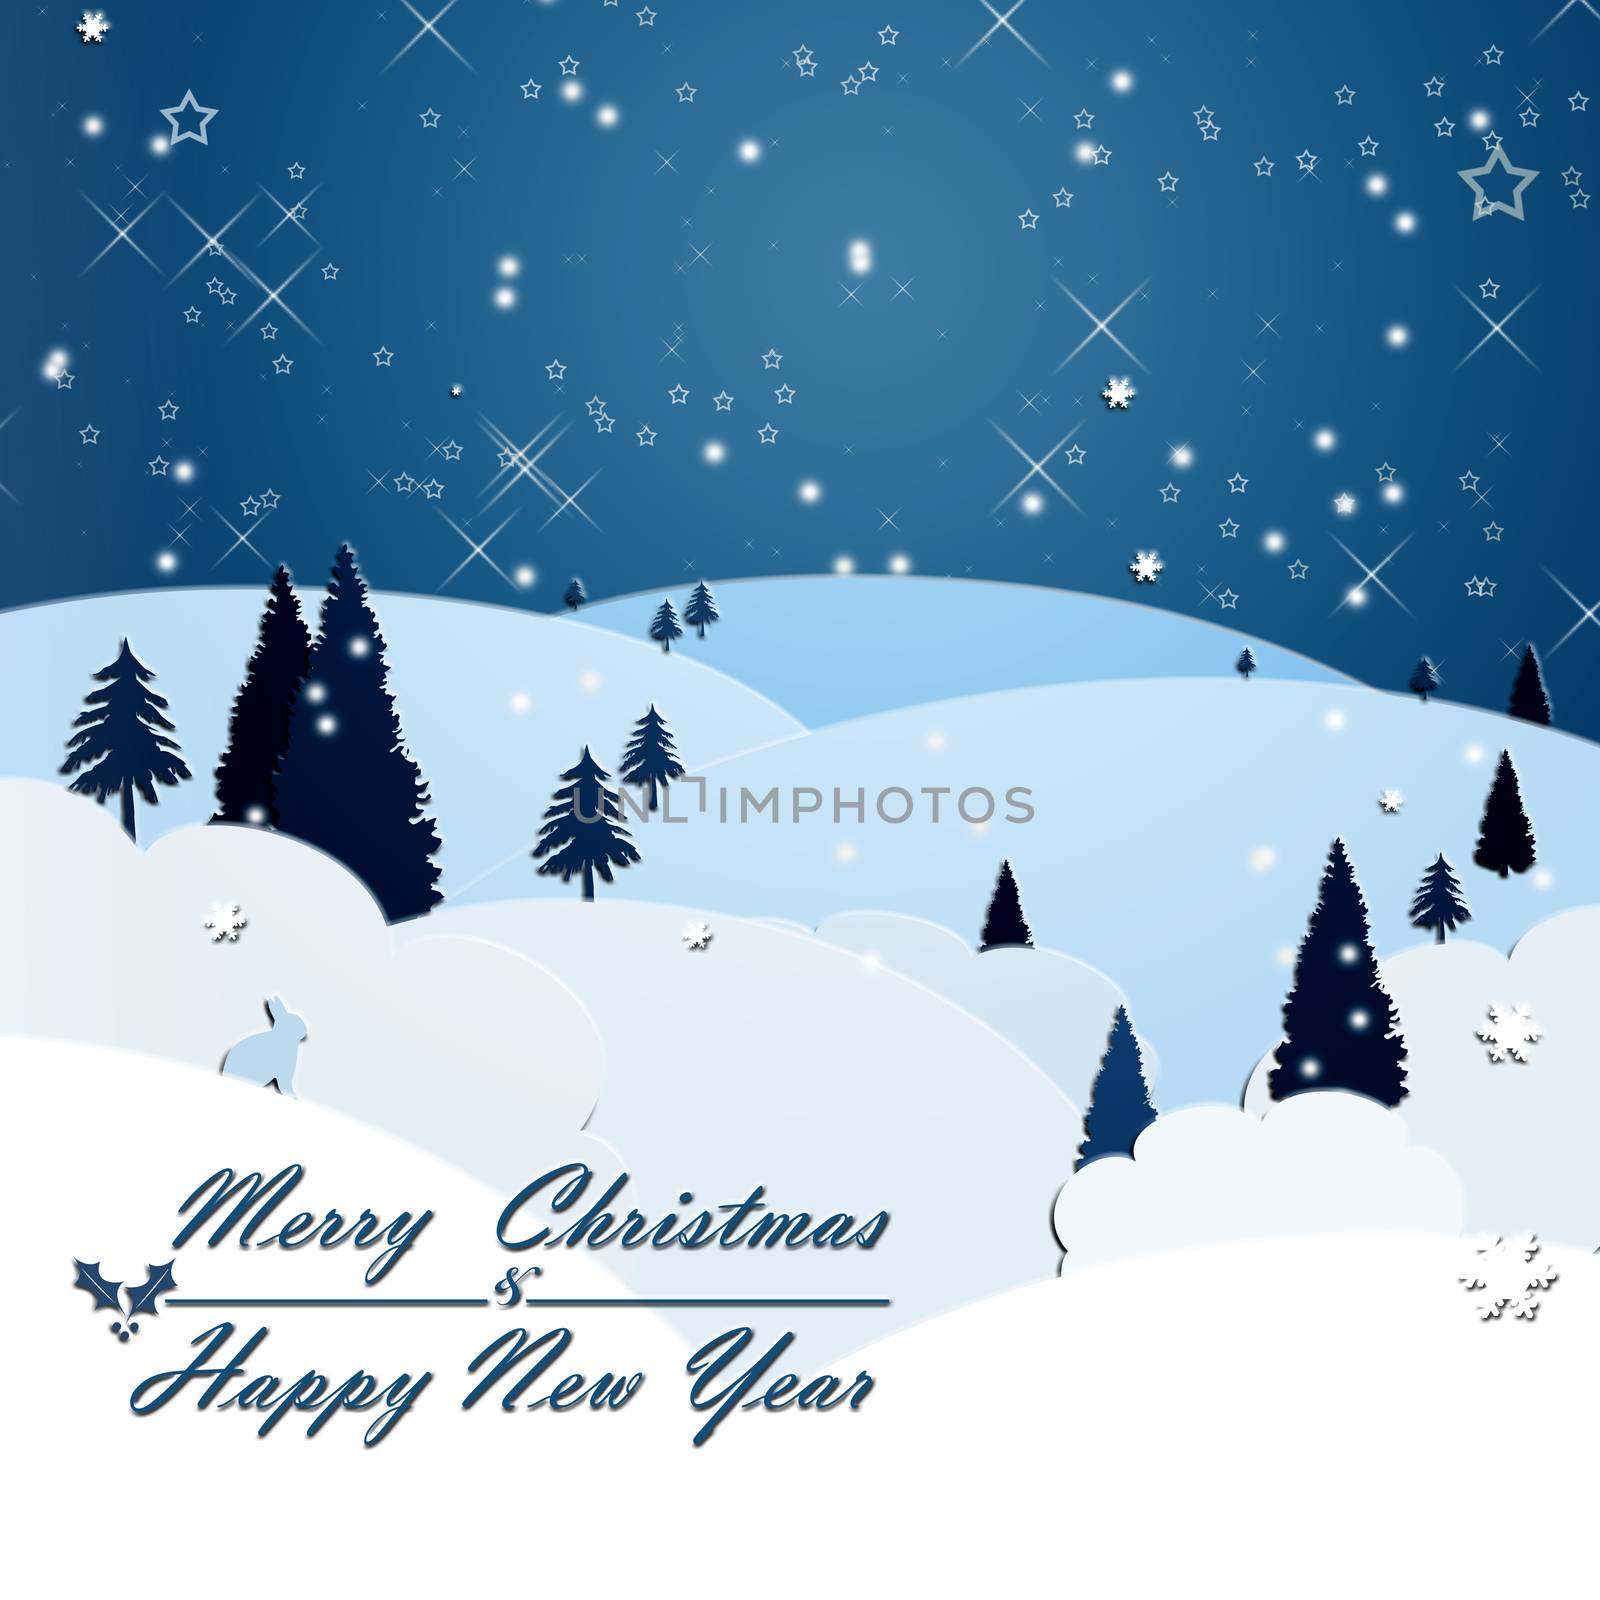 Christmas winter rural abstract landscape background with Christmas fir trees, snow, snowflakes and text on white blue colour. Merry Christmas and Happy New Year. Digital art style. 3D Illustration